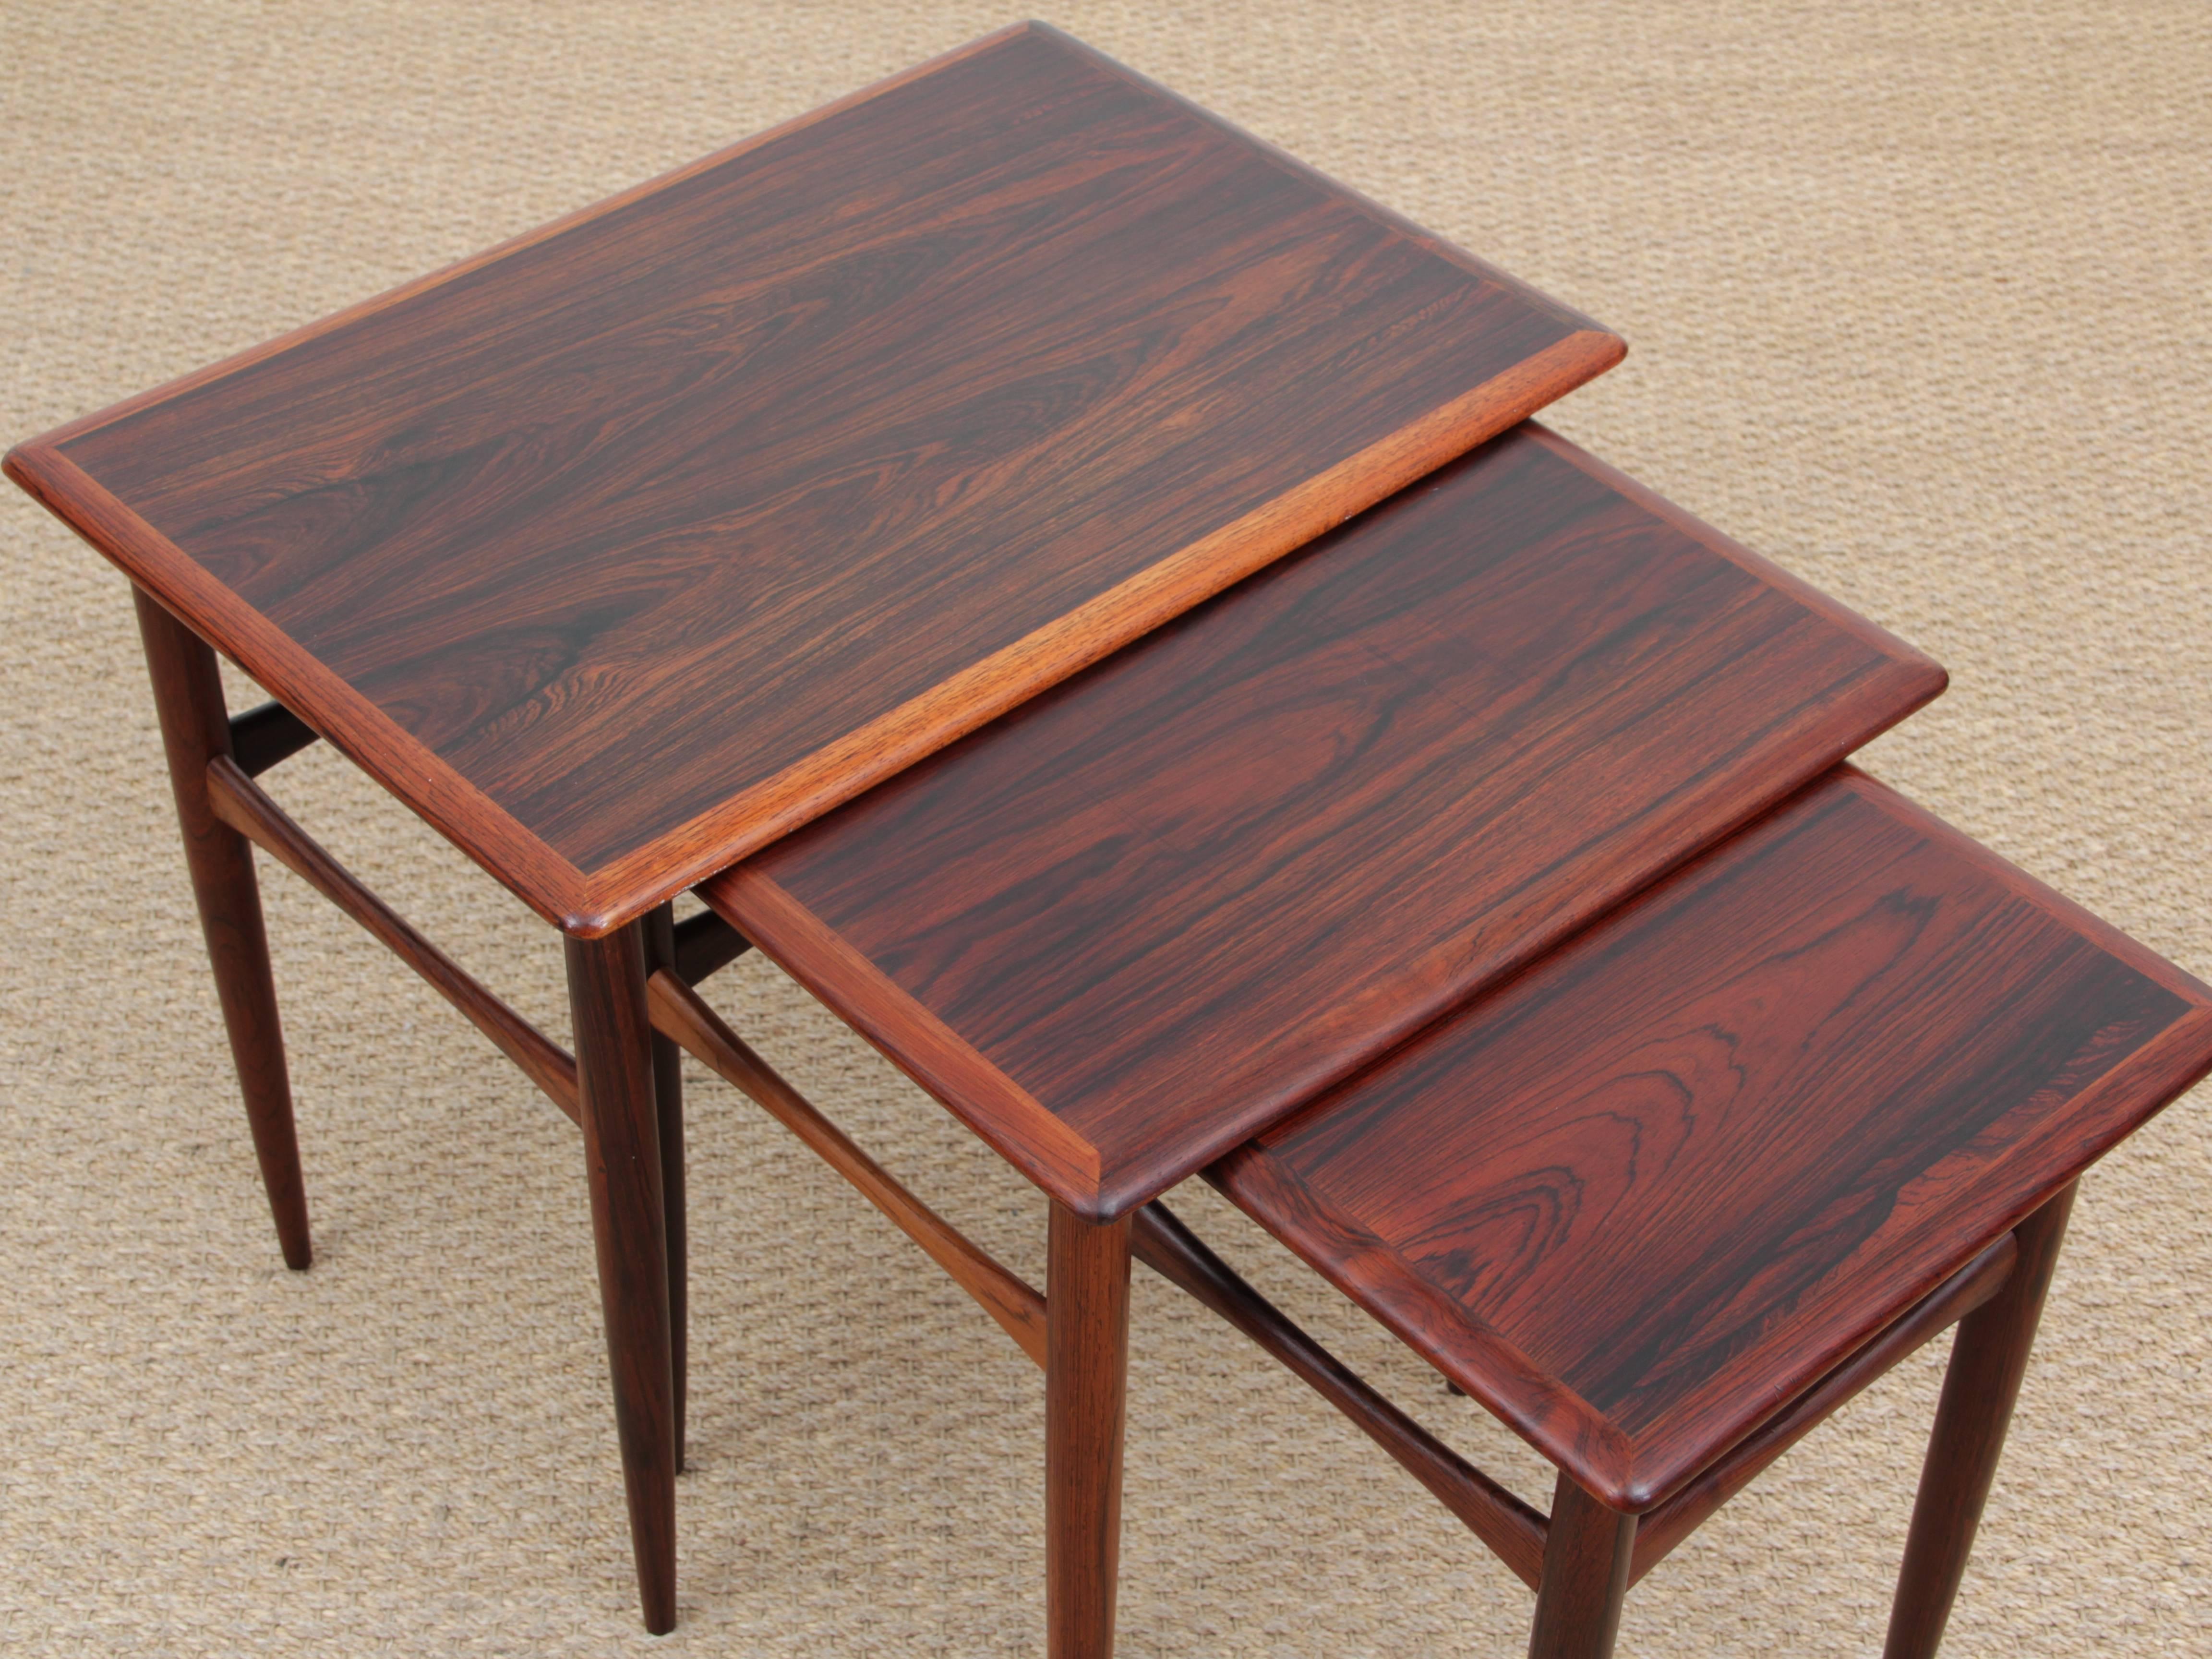 Danish Mid-Century Modern Scandinavian Nesting Tables in Rosewood by Poul Hundevad